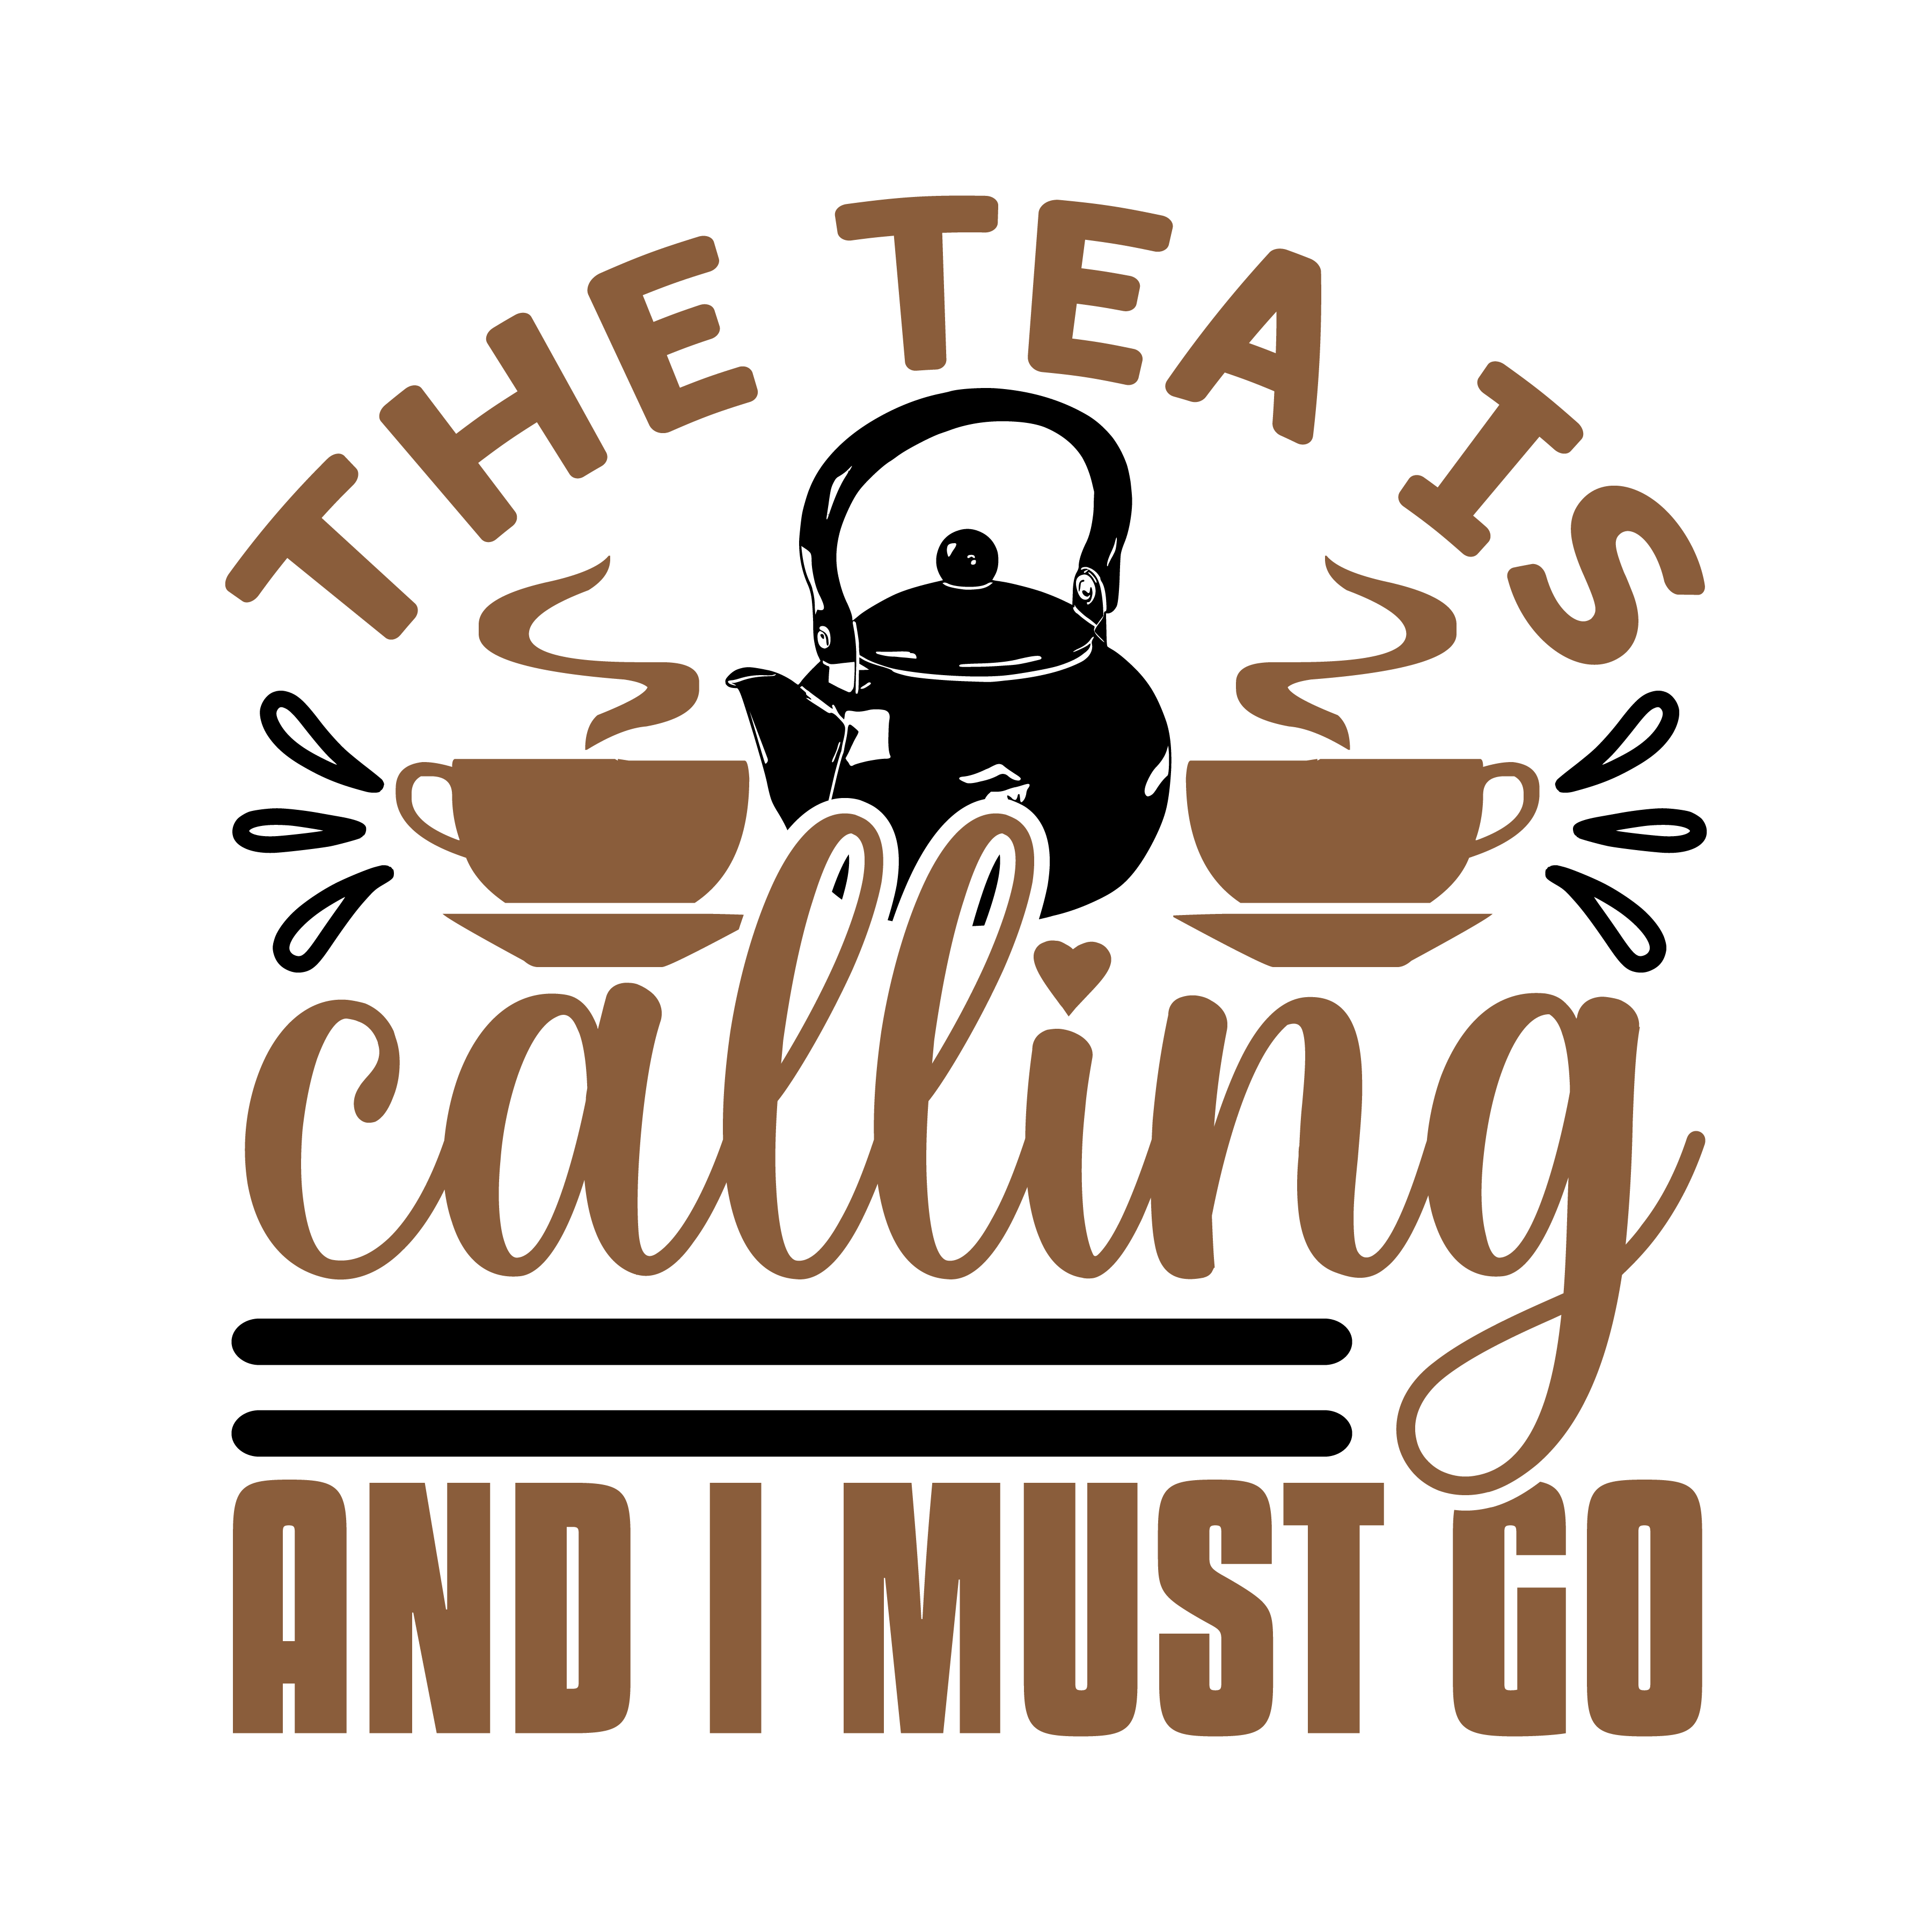 the tea is calling and i must go, tea sayings, tea quotes, Cricut designs, free, clip art, svg file, template, pattern, stencil, silhouette, cut file, design space, short, funny, shirt, cup, DIY crafts and projects, embroidery